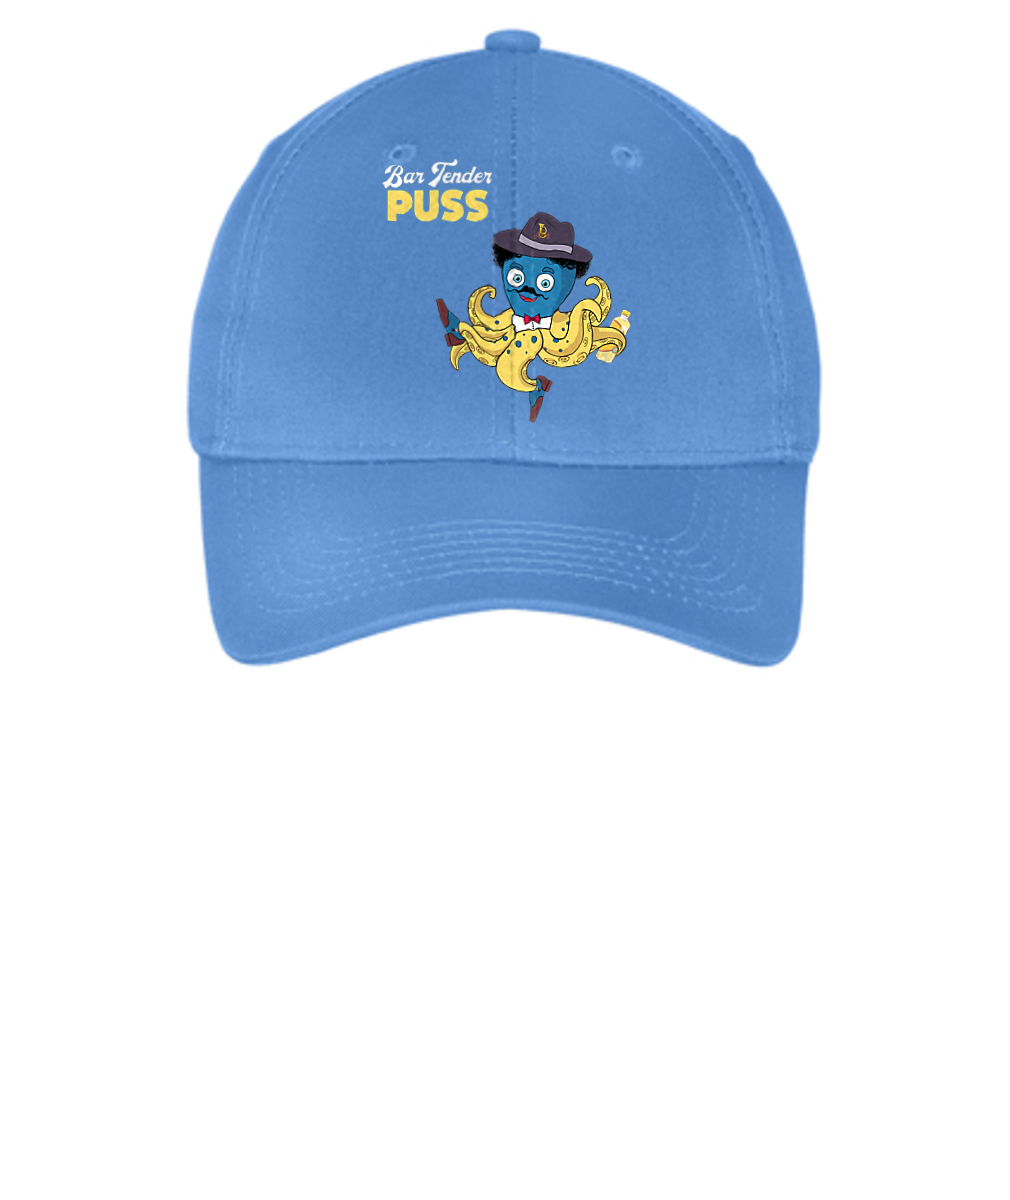 Bartender Puss- Embroidered Youth Six-Panel Twill Cap or Similar